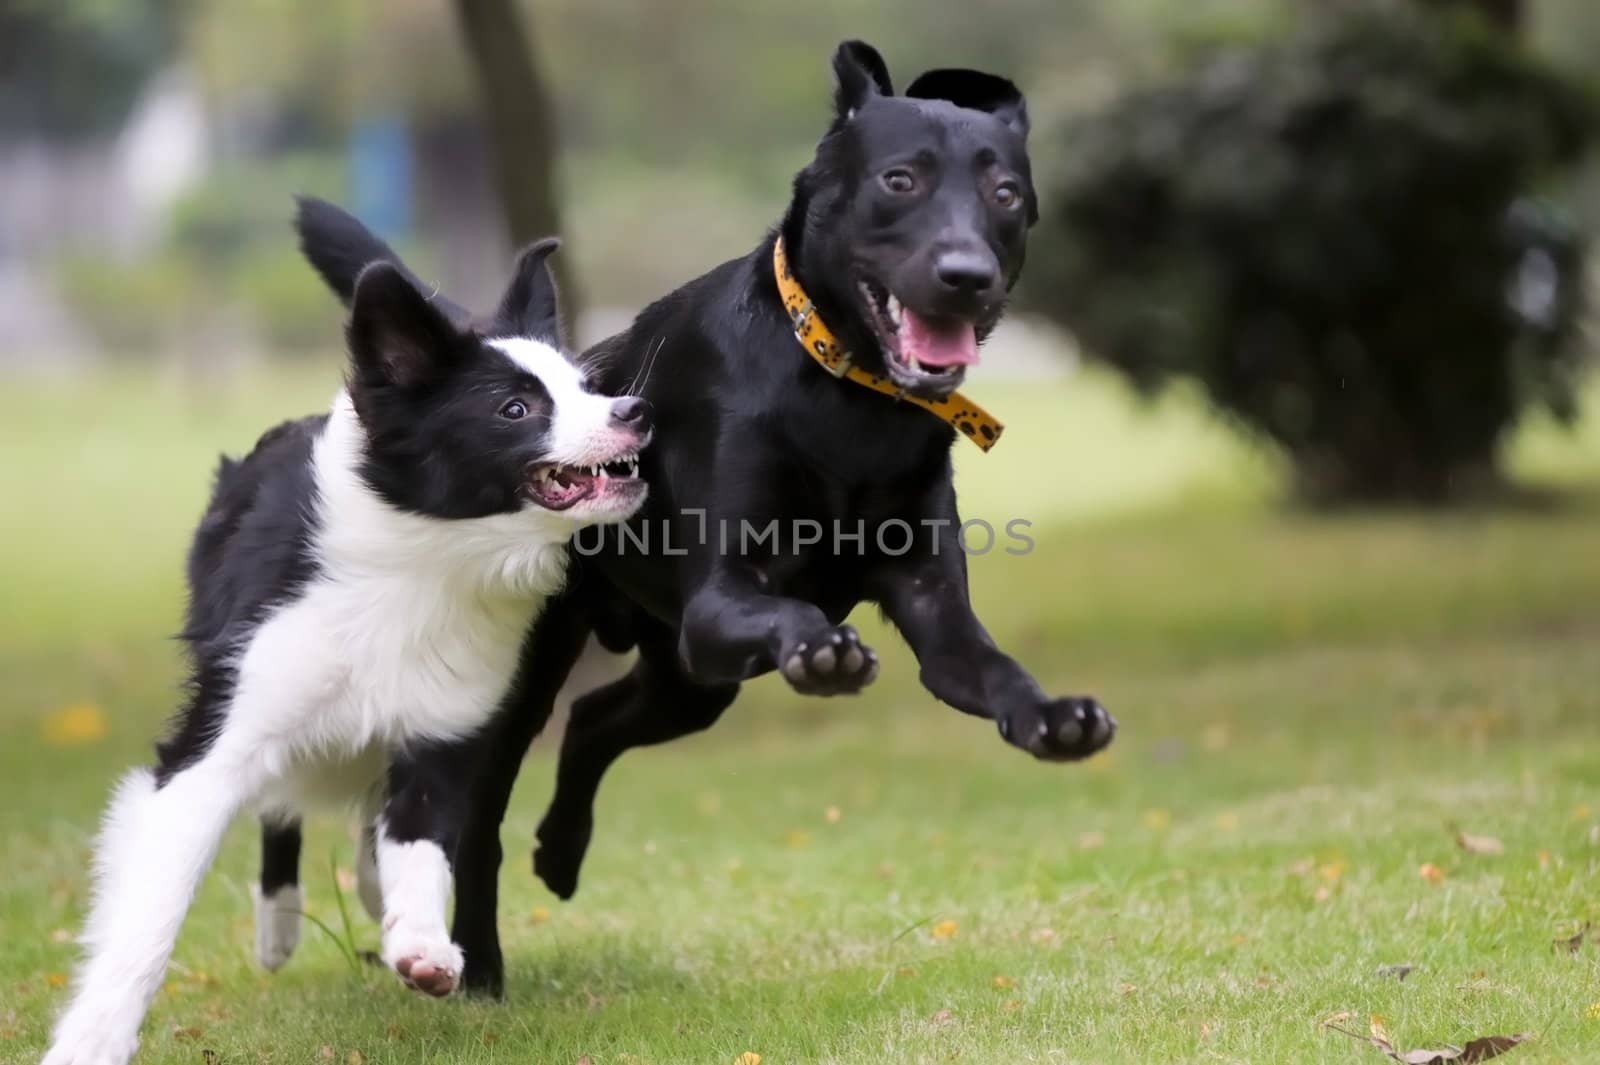 Two dogs racing on the lawn in the park